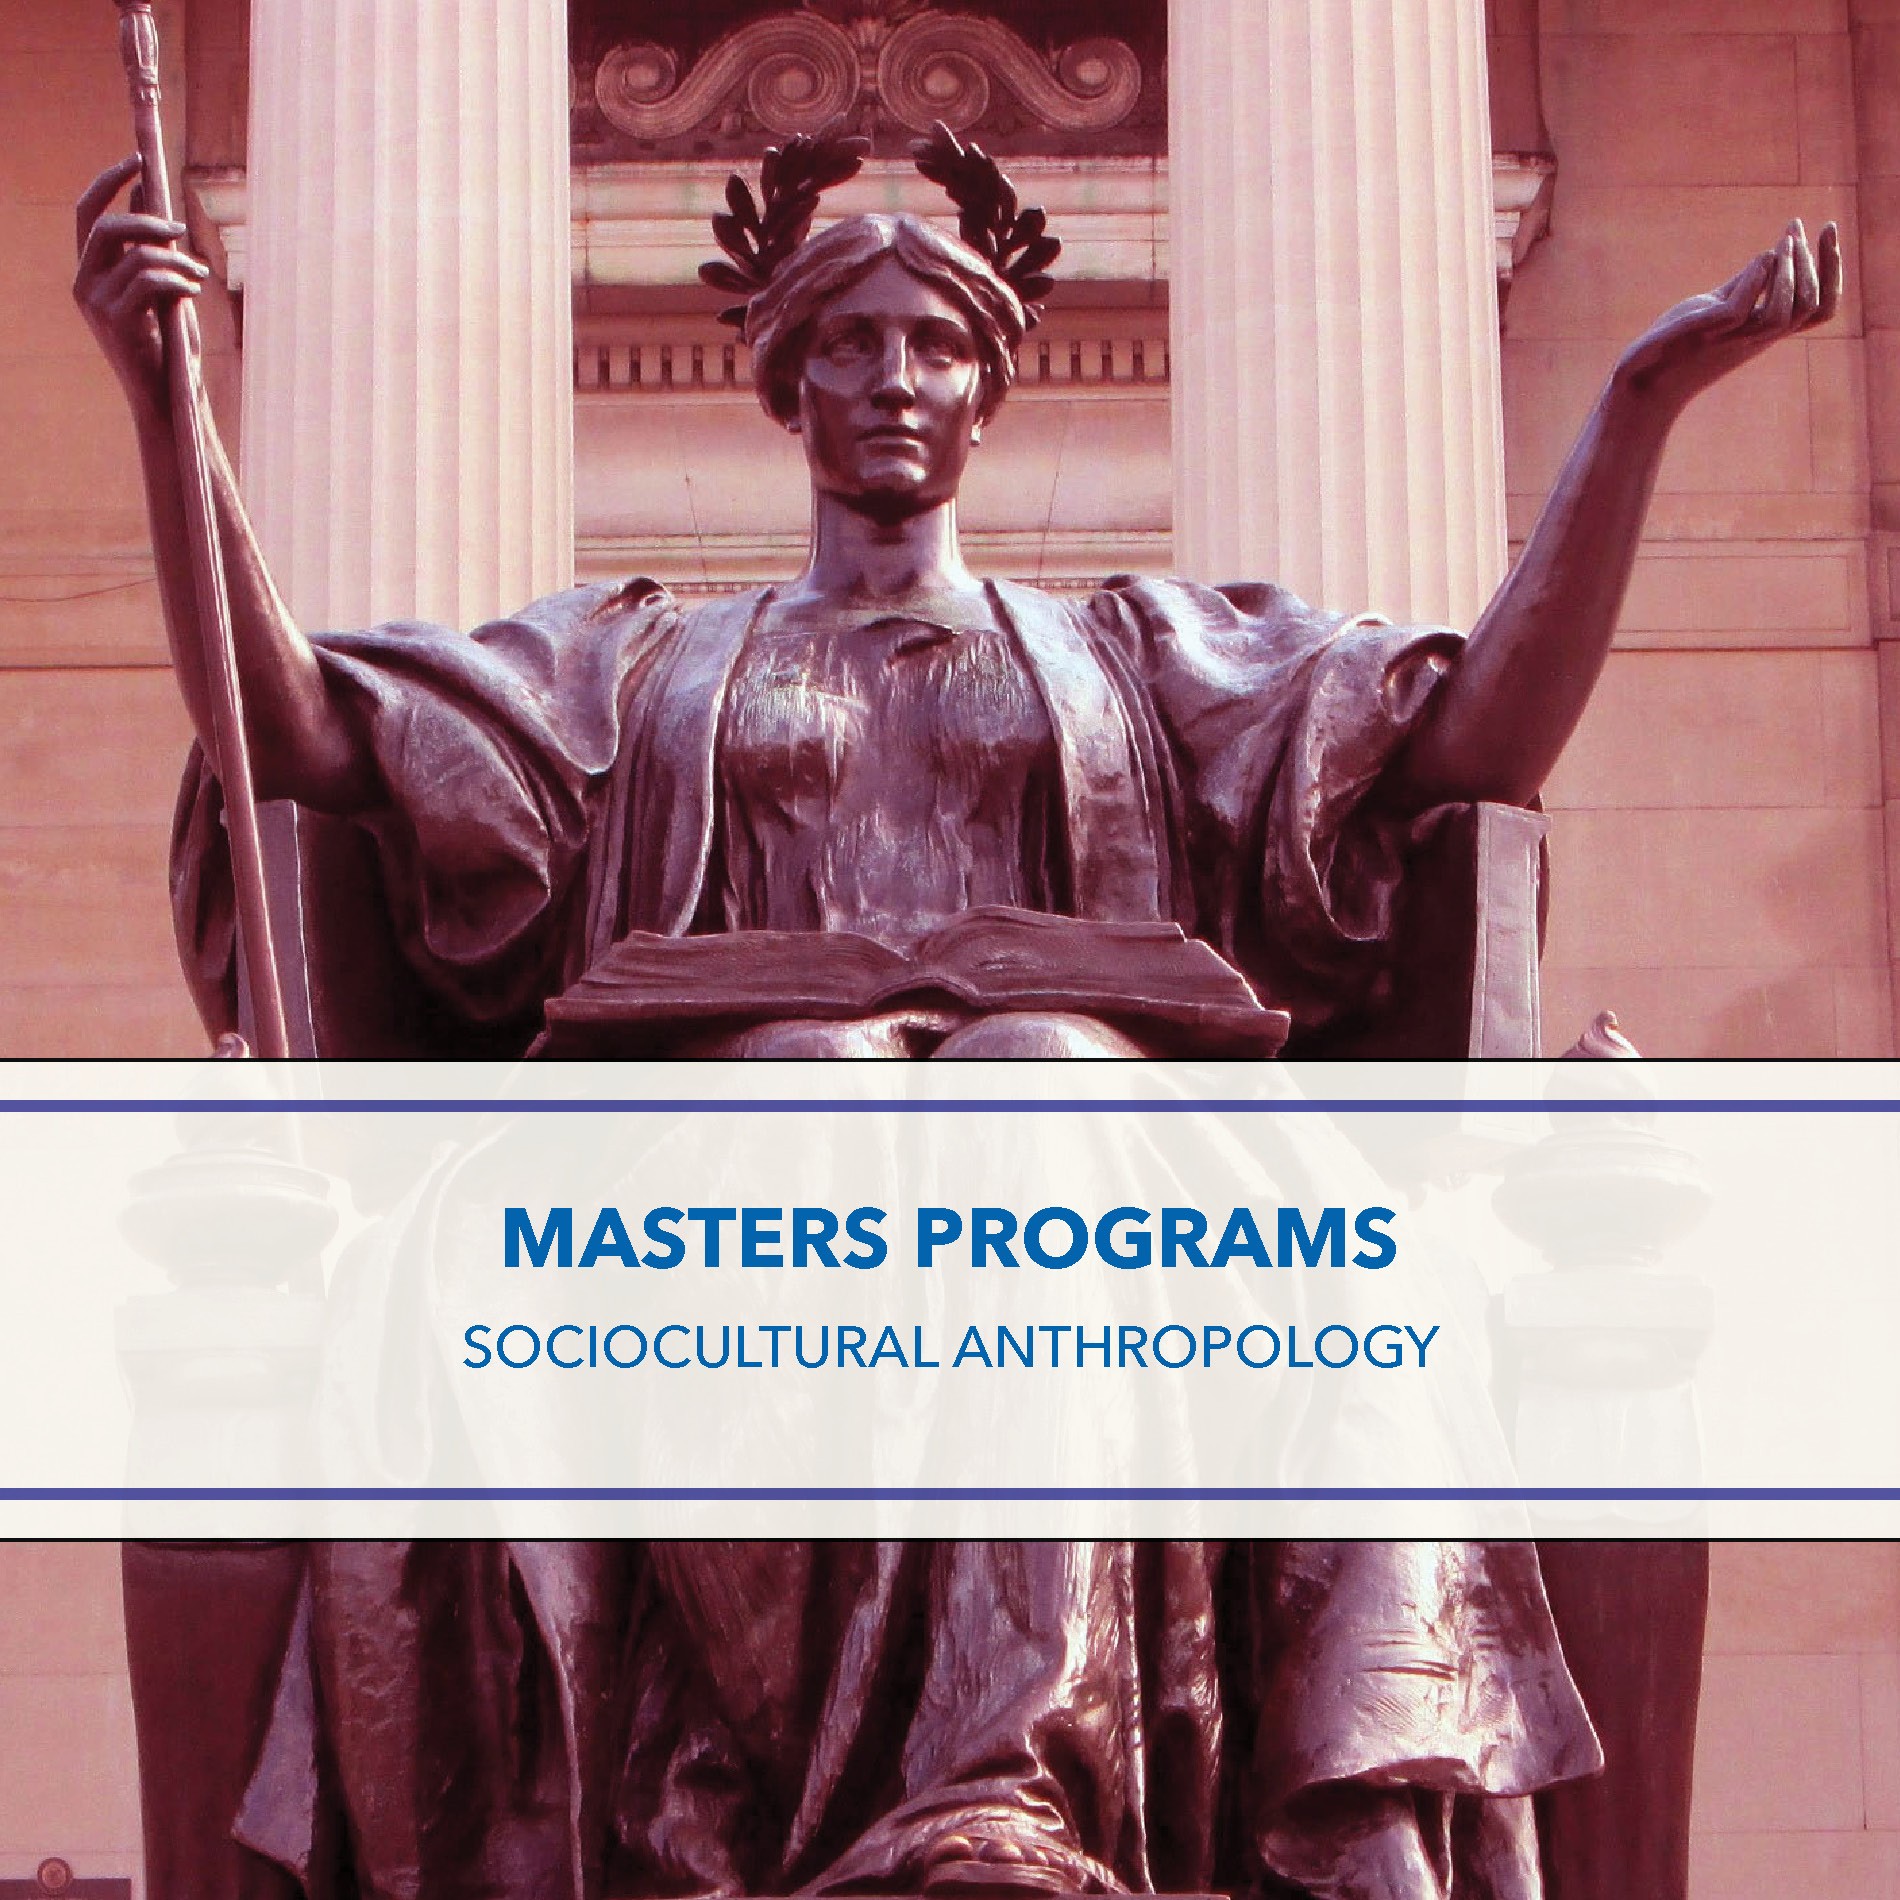 Masters Programs. Sociocultural Anthropology